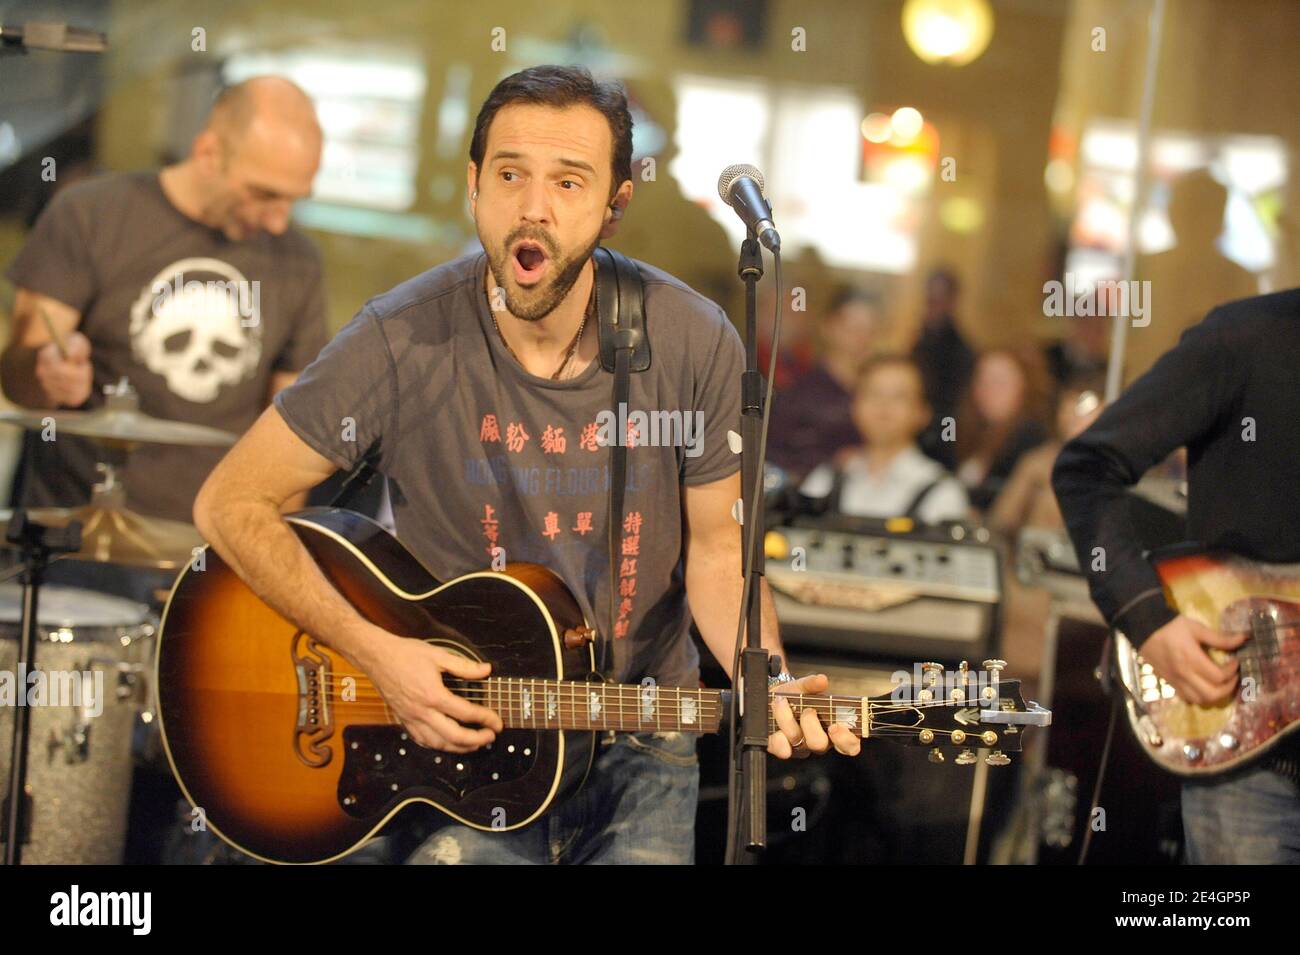 Gerald De Palmas performs live at the new Apple Store in Paris, France on  November 20, 2009. Photo by Giancarlo Gorassini/ABACAPRESS.COM Stock Photo  - Alamy